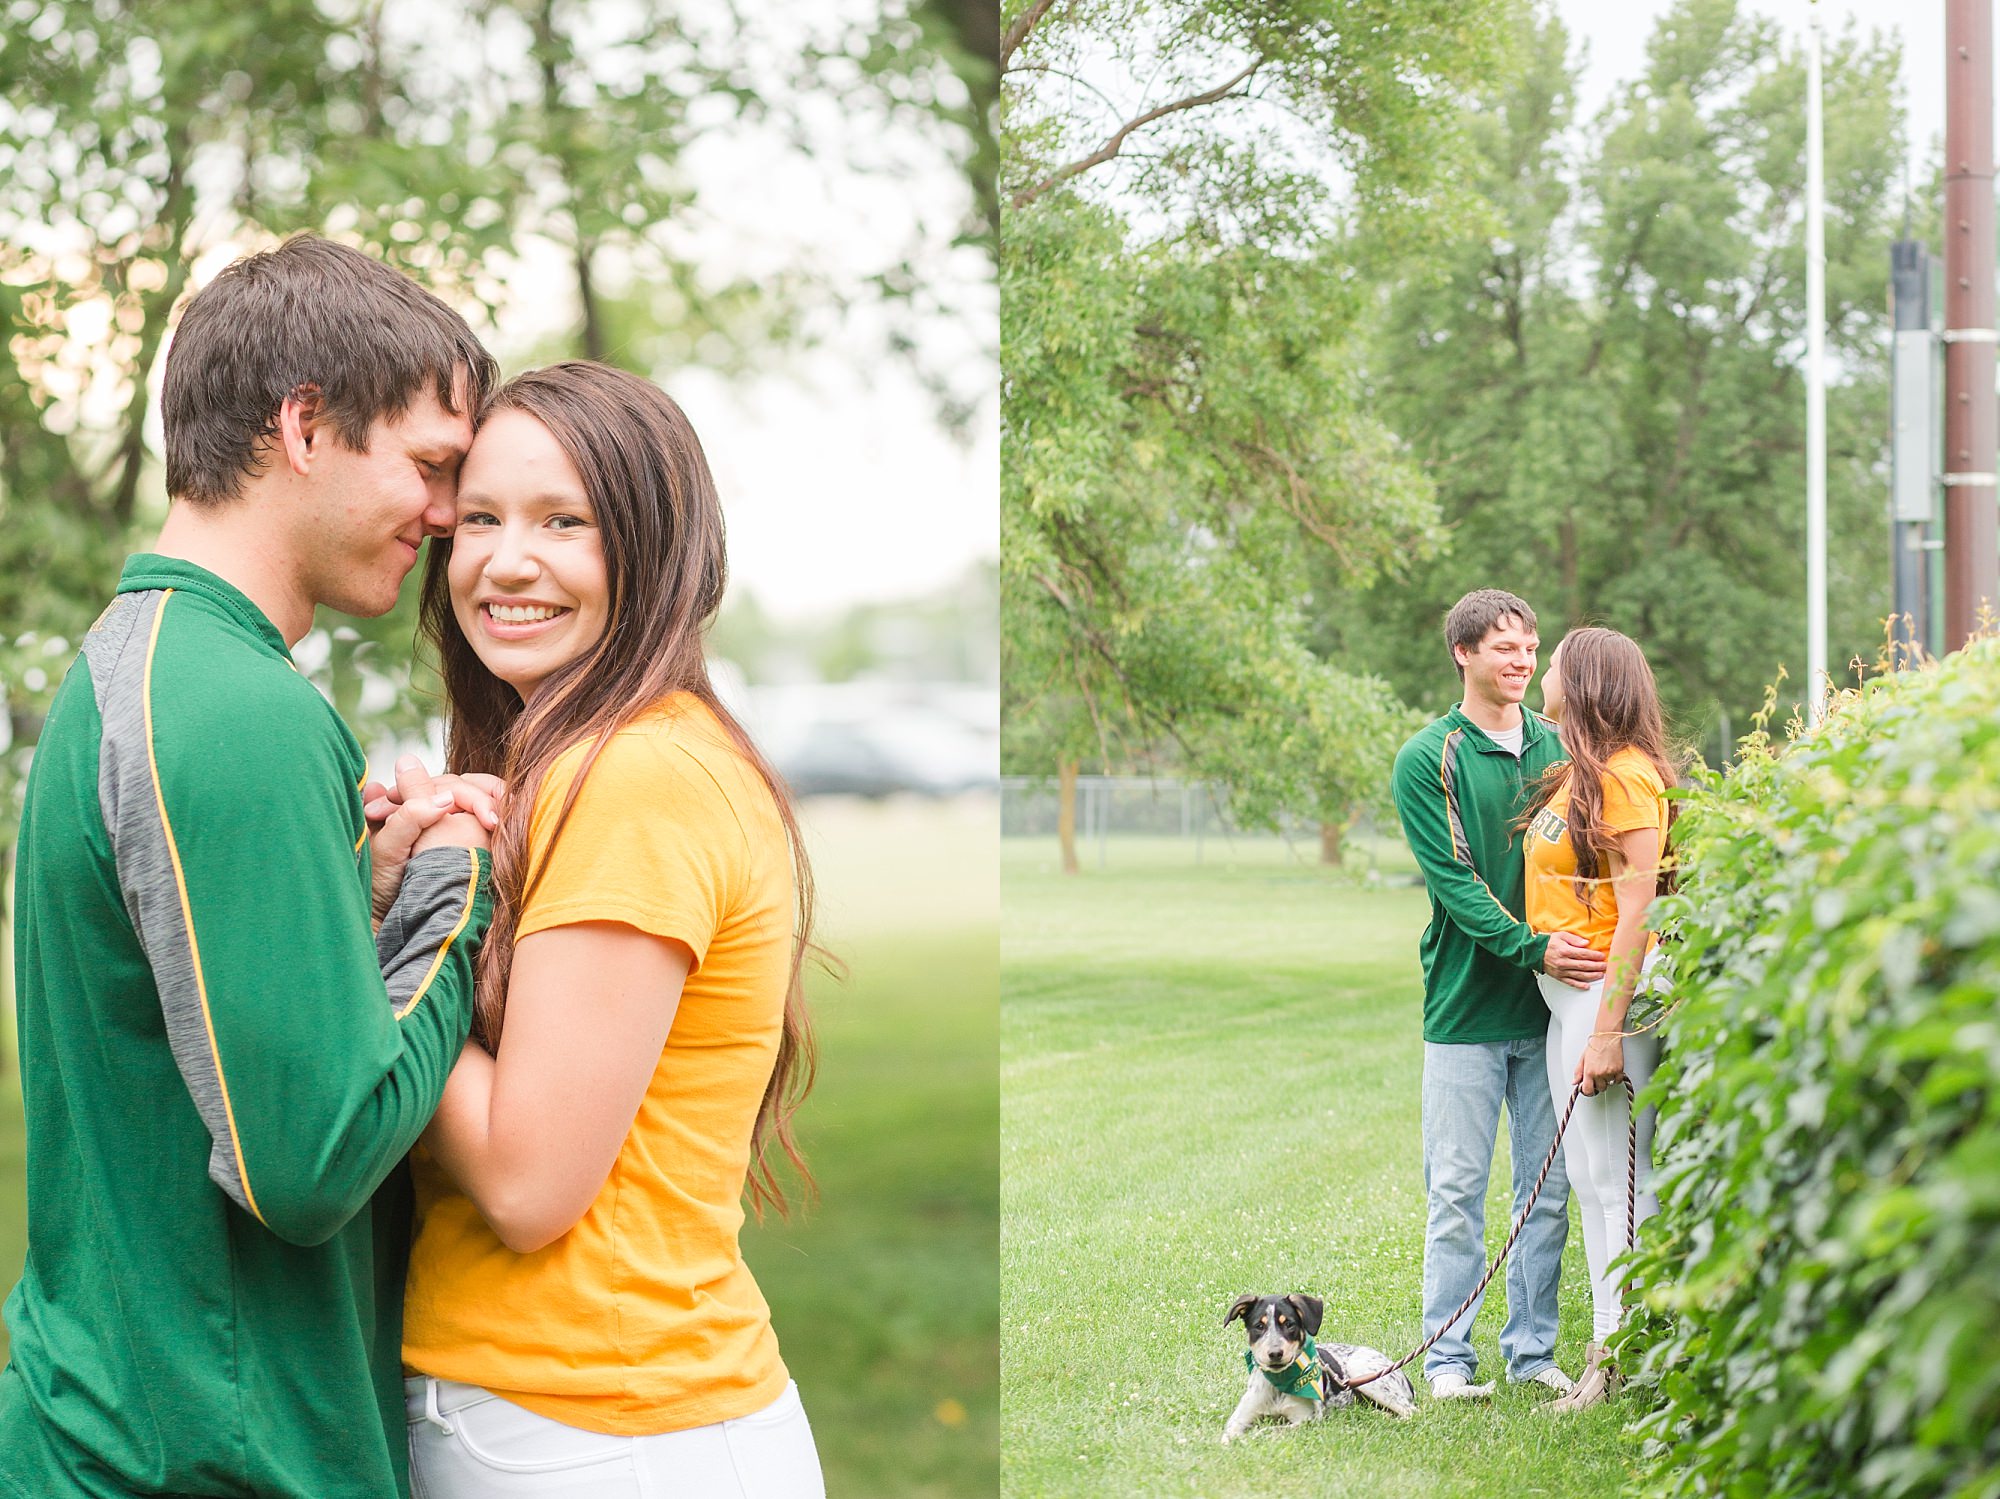 A couple in Bison gear smile and embrace during their engagement session with a puppy